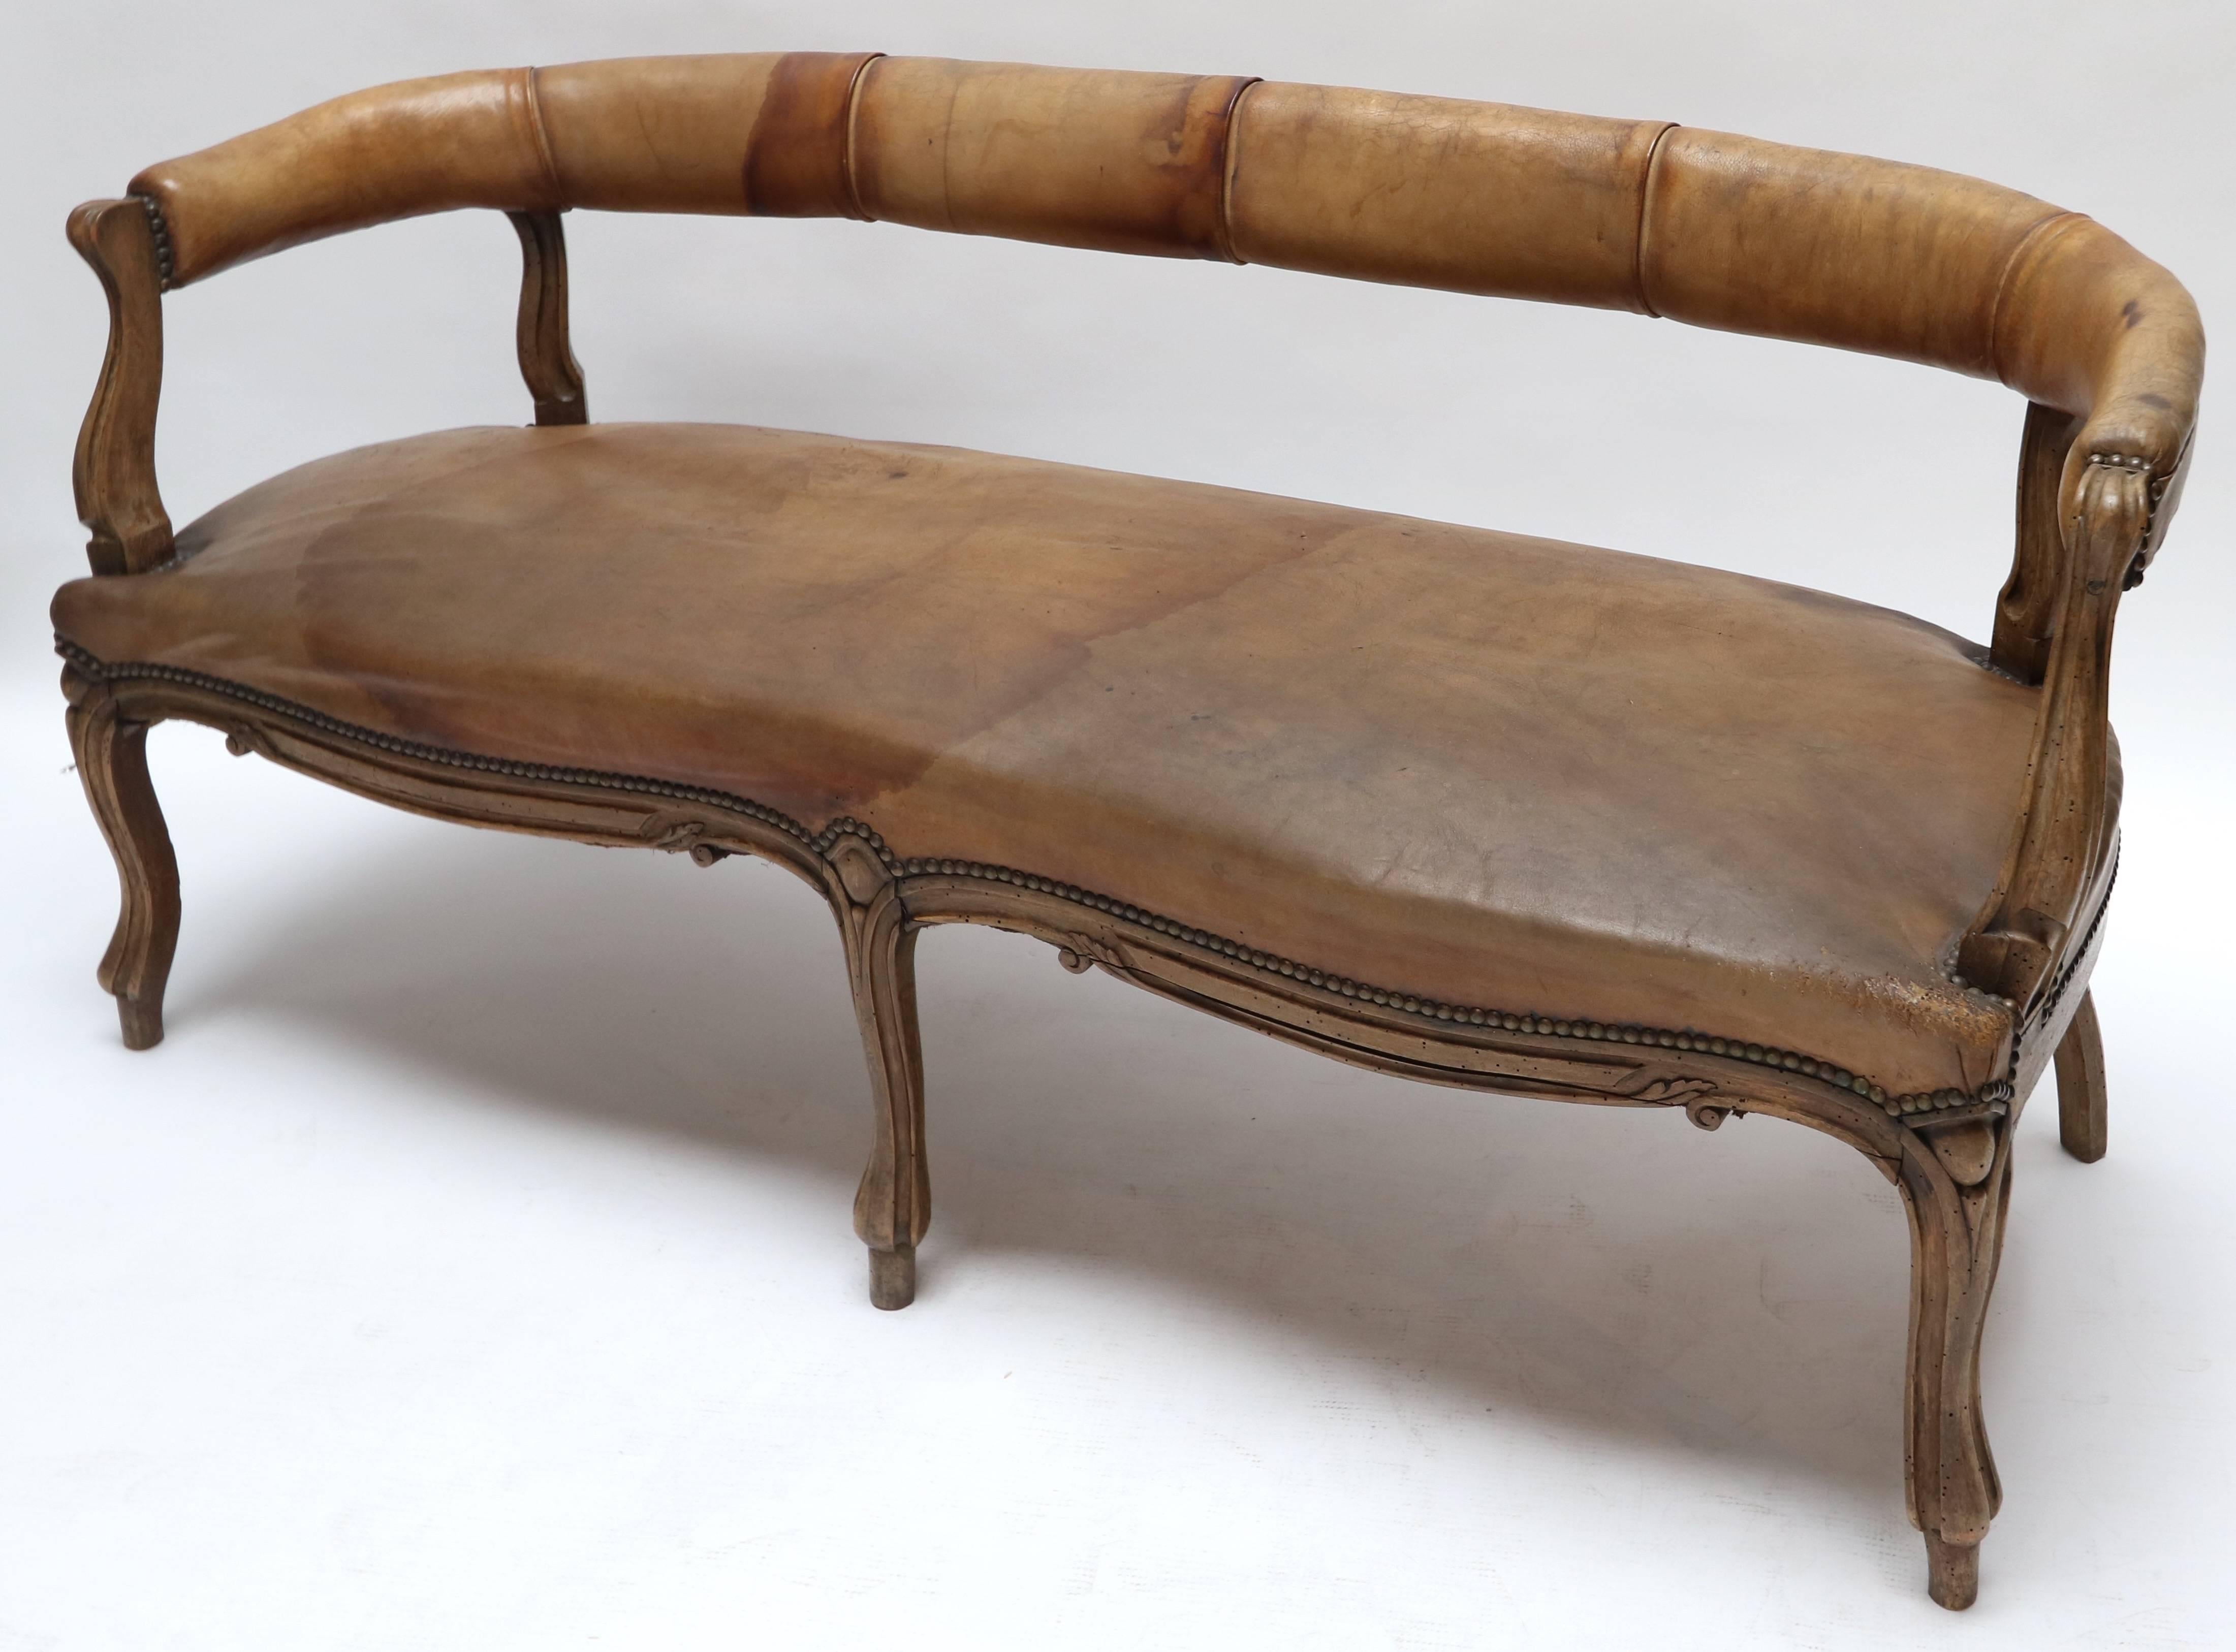 19th century Italian Louis XV style carved wood and leather sofa.